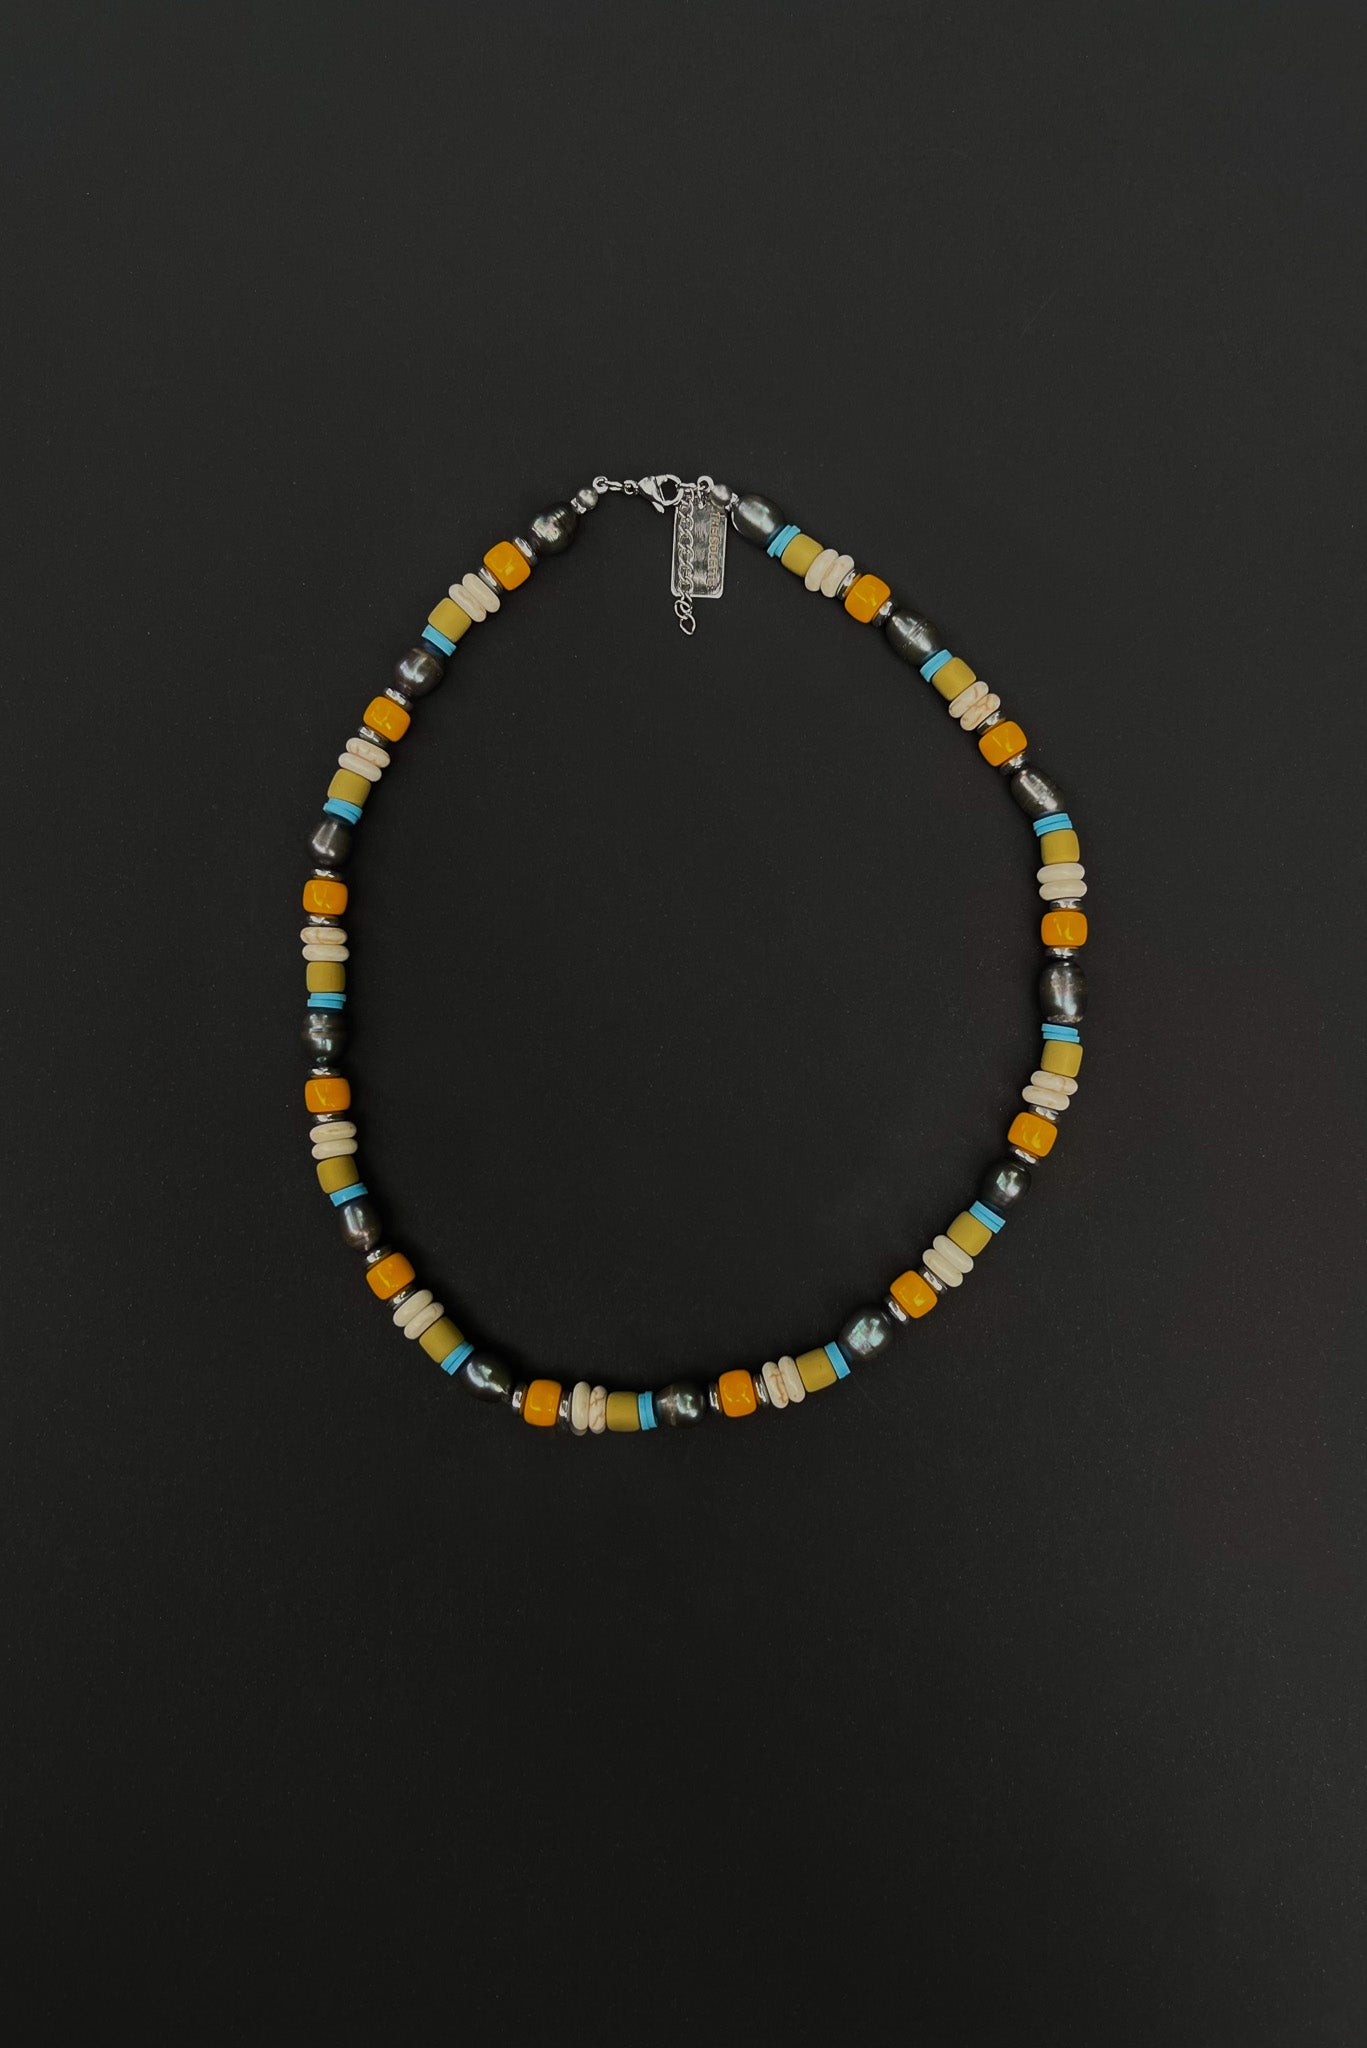 GUADALUPE Beads Necklace